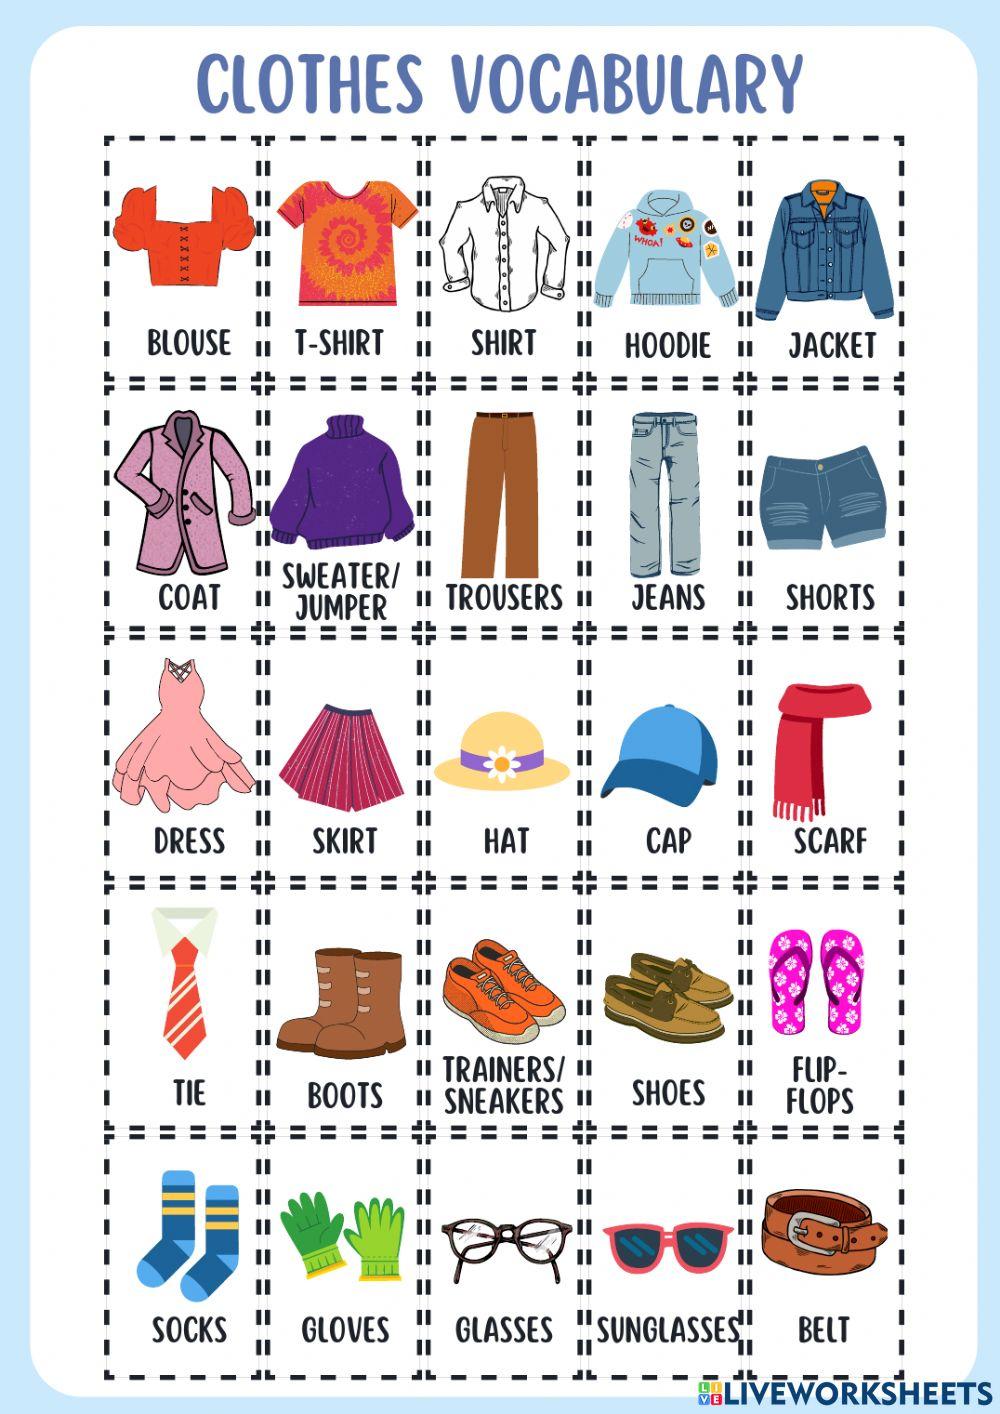 Clothes Vocabulary online worksheet for Juniors I